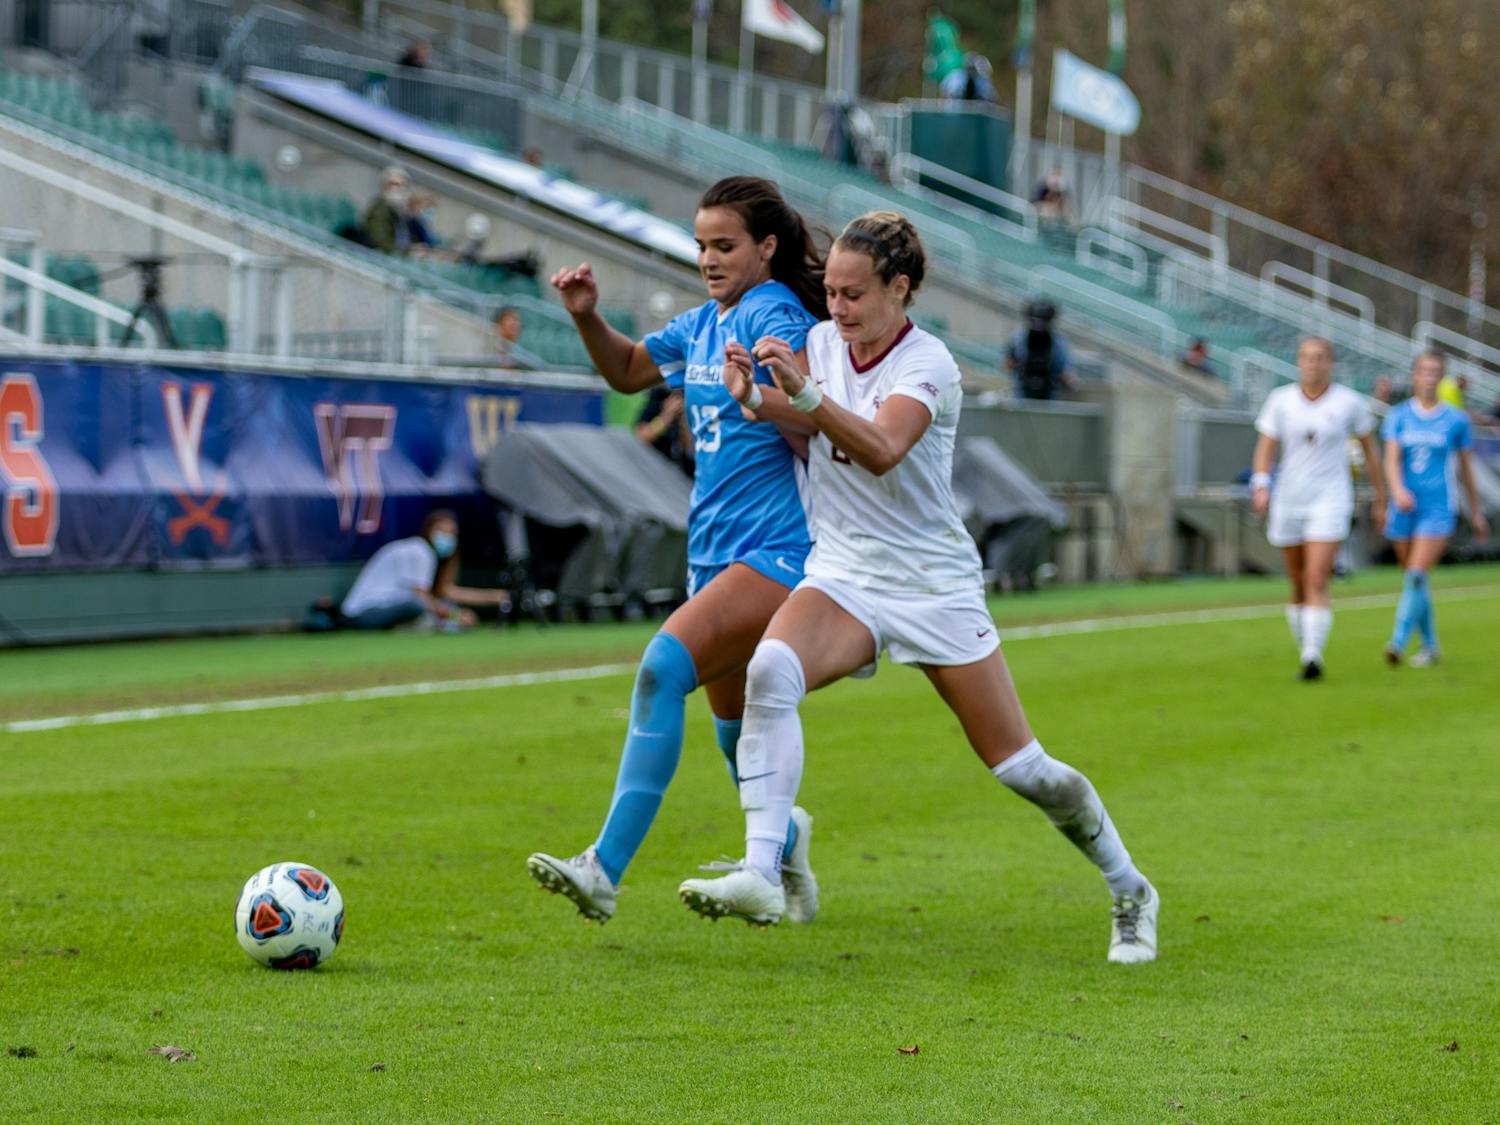 UNC sophomore forward Isabel Cox (13) drives downfield against FSU junior midfielder Jailen Howell (6) in Sahlen's Stadium in Cary, NC on Sunday, Nov. 15, 2020. The Seminoles beat the Tar Heels 3-2 to win the ACC Women's Soccer championship.